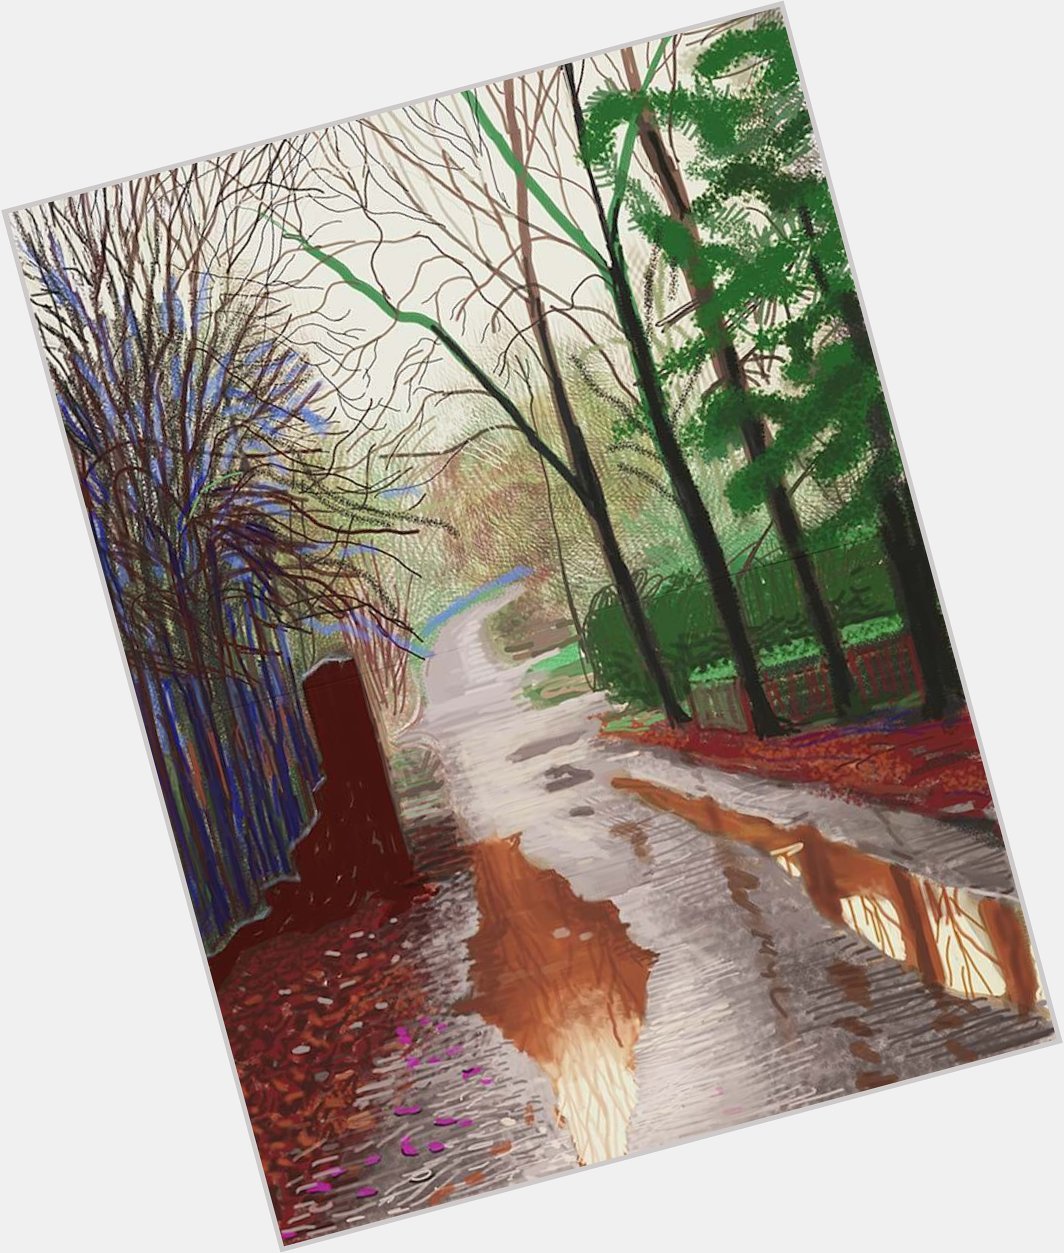  Happy Birthday to artist David Hockney, born on this day in 1937. At 81 years old he continues to create new 